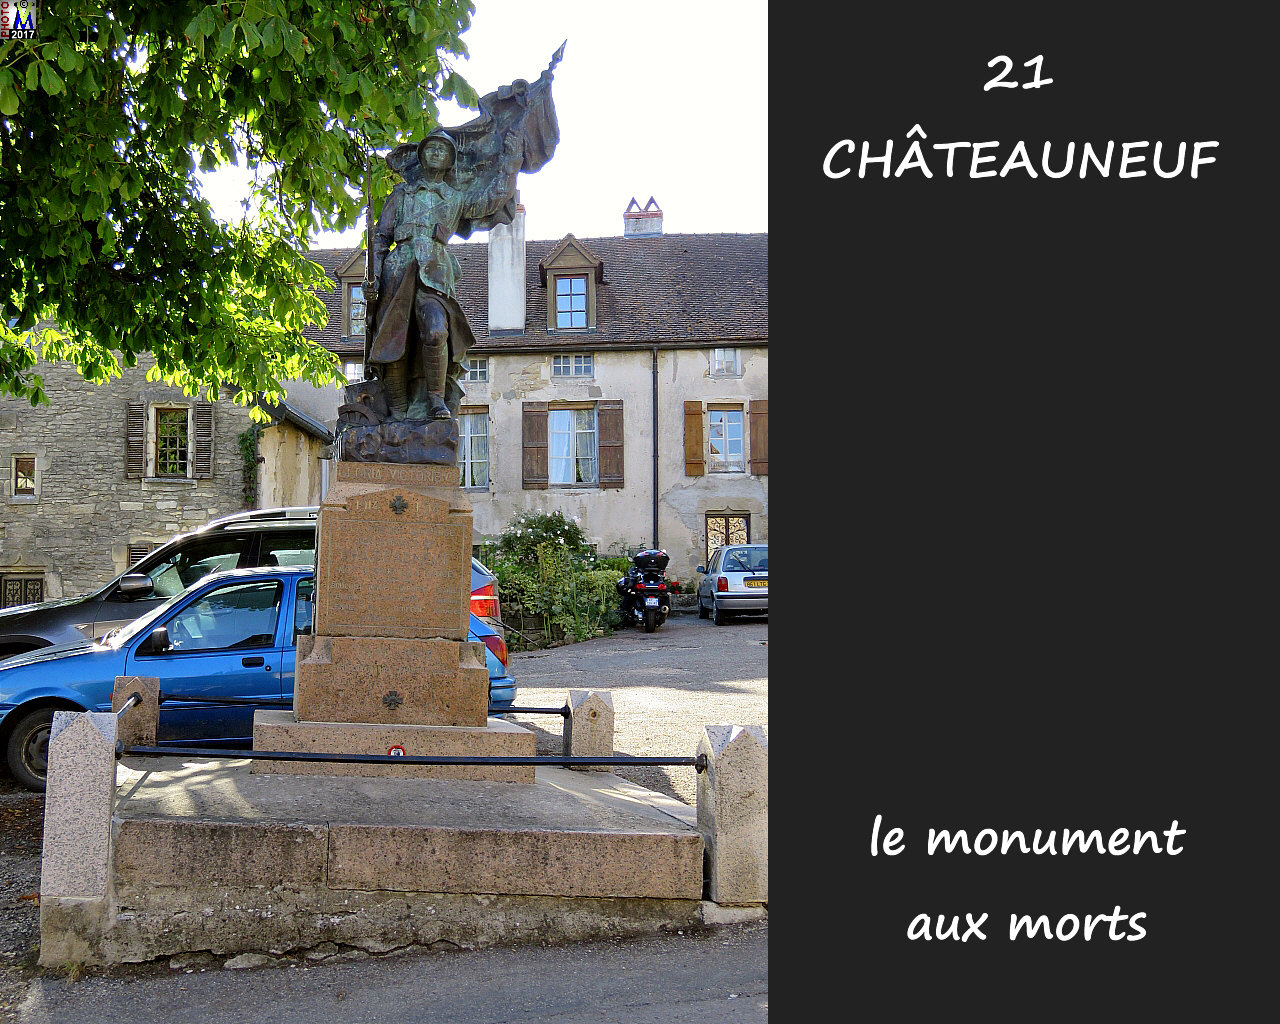 21CHATEAUNEUF_morts_100.jpg